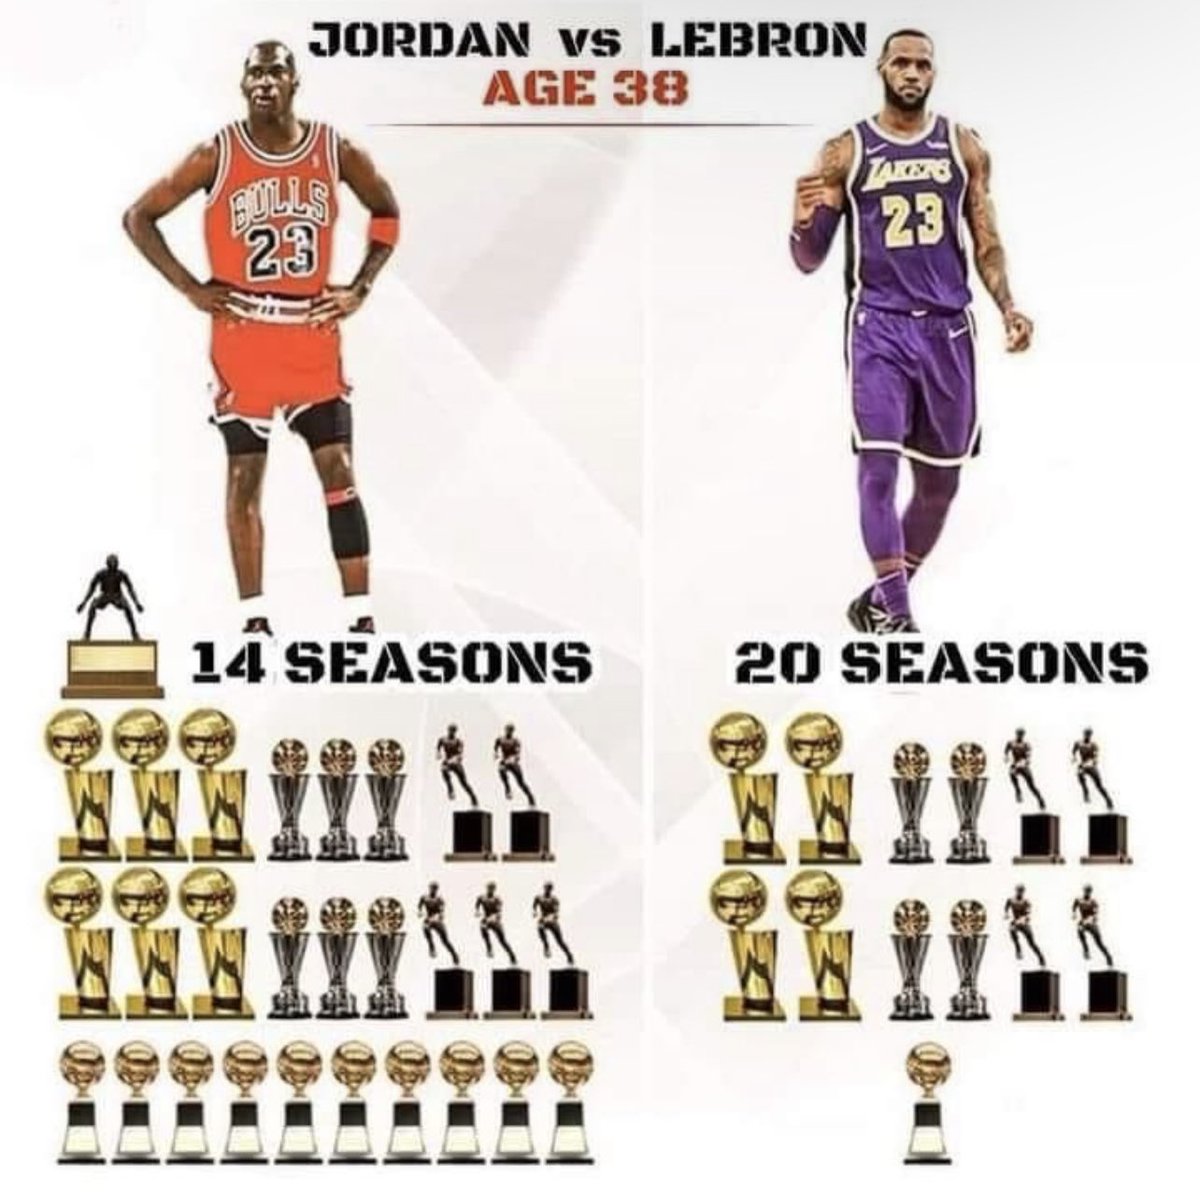 There is no debate. There is no comparison. There is no conversation. Lebron is a nice player with good stats and a long career. MJ is the GOAT. 🐐